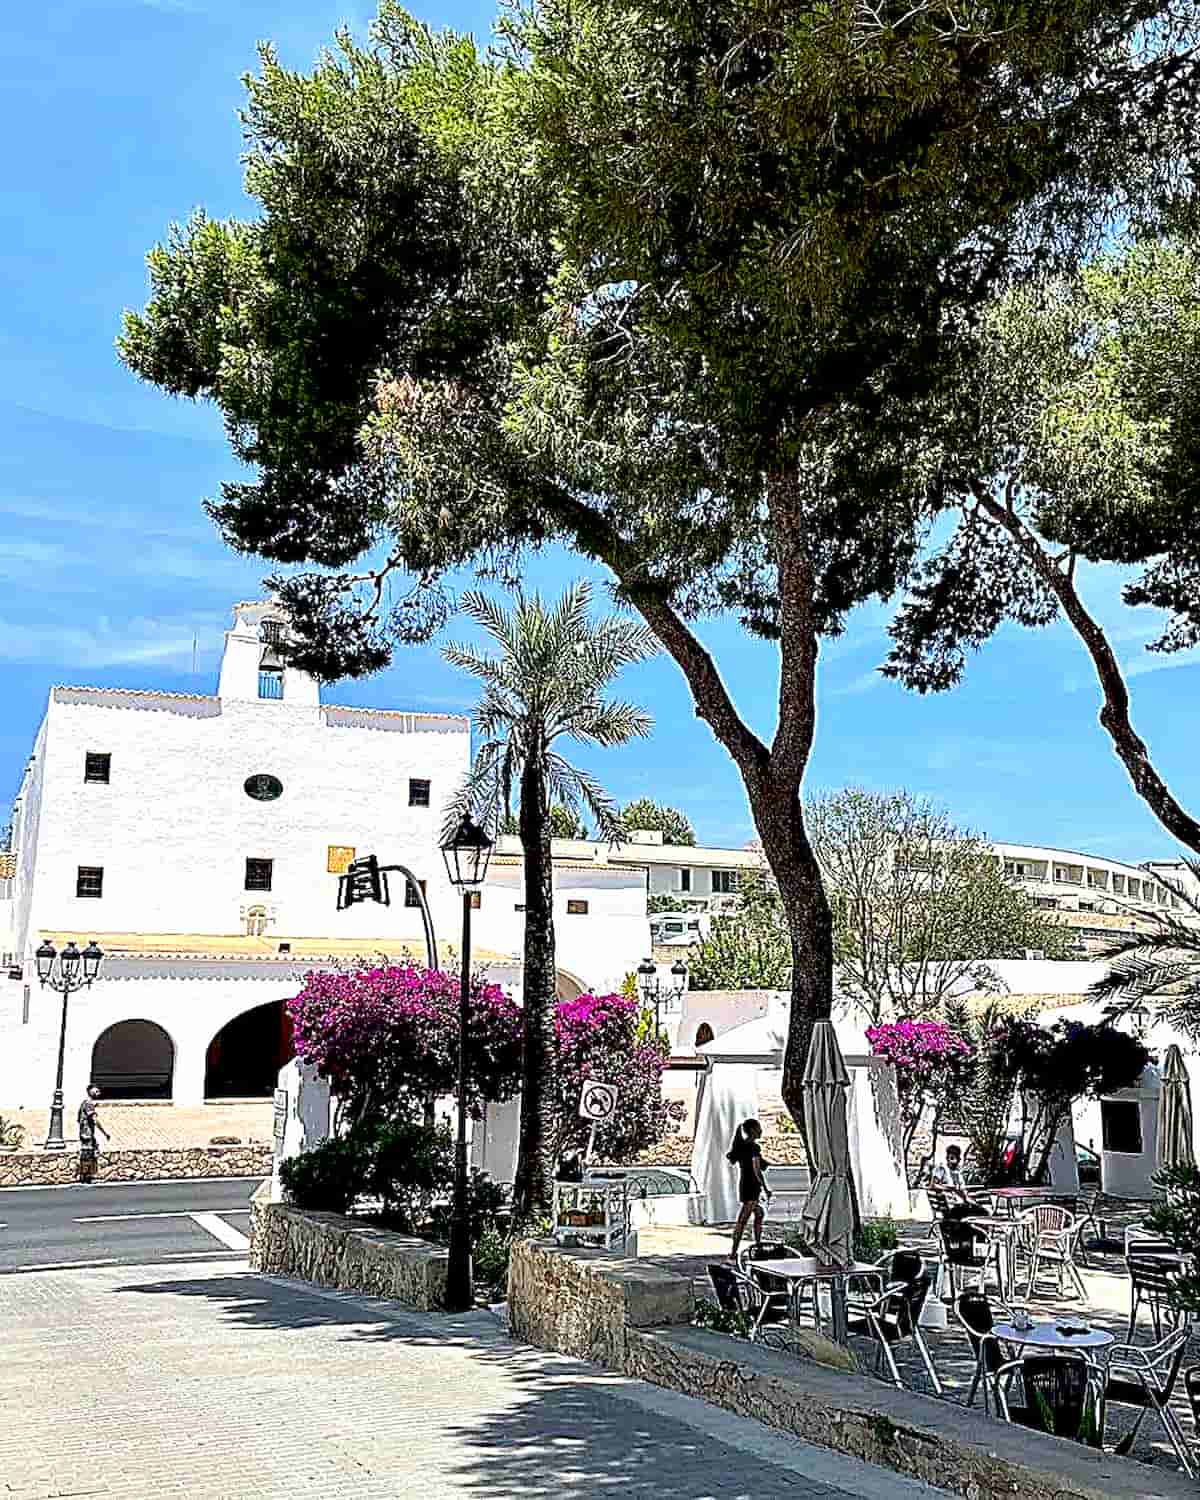 05 - Ibiza is a picturesque island with unexpected Stunning Places to Visit